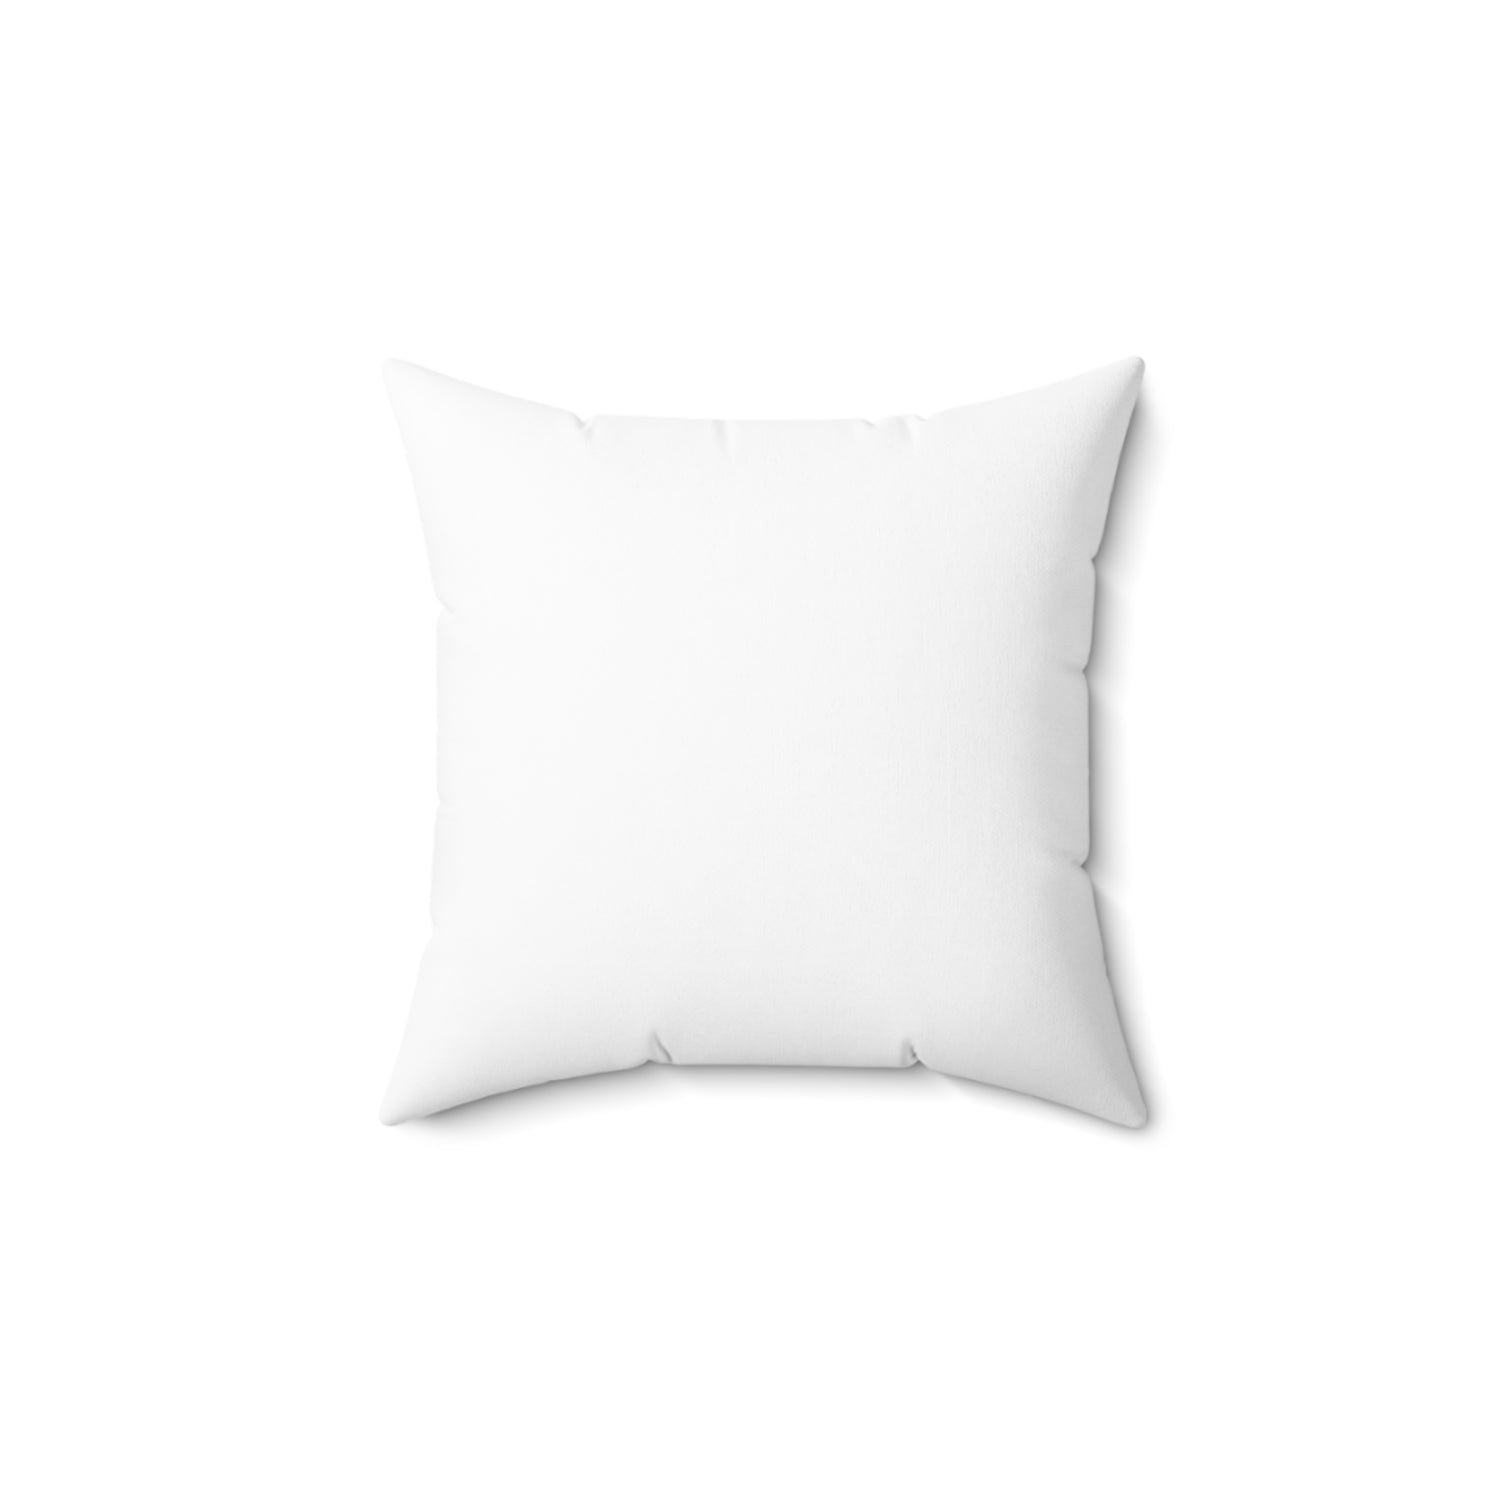 I am Woman Polyester Square Pillow